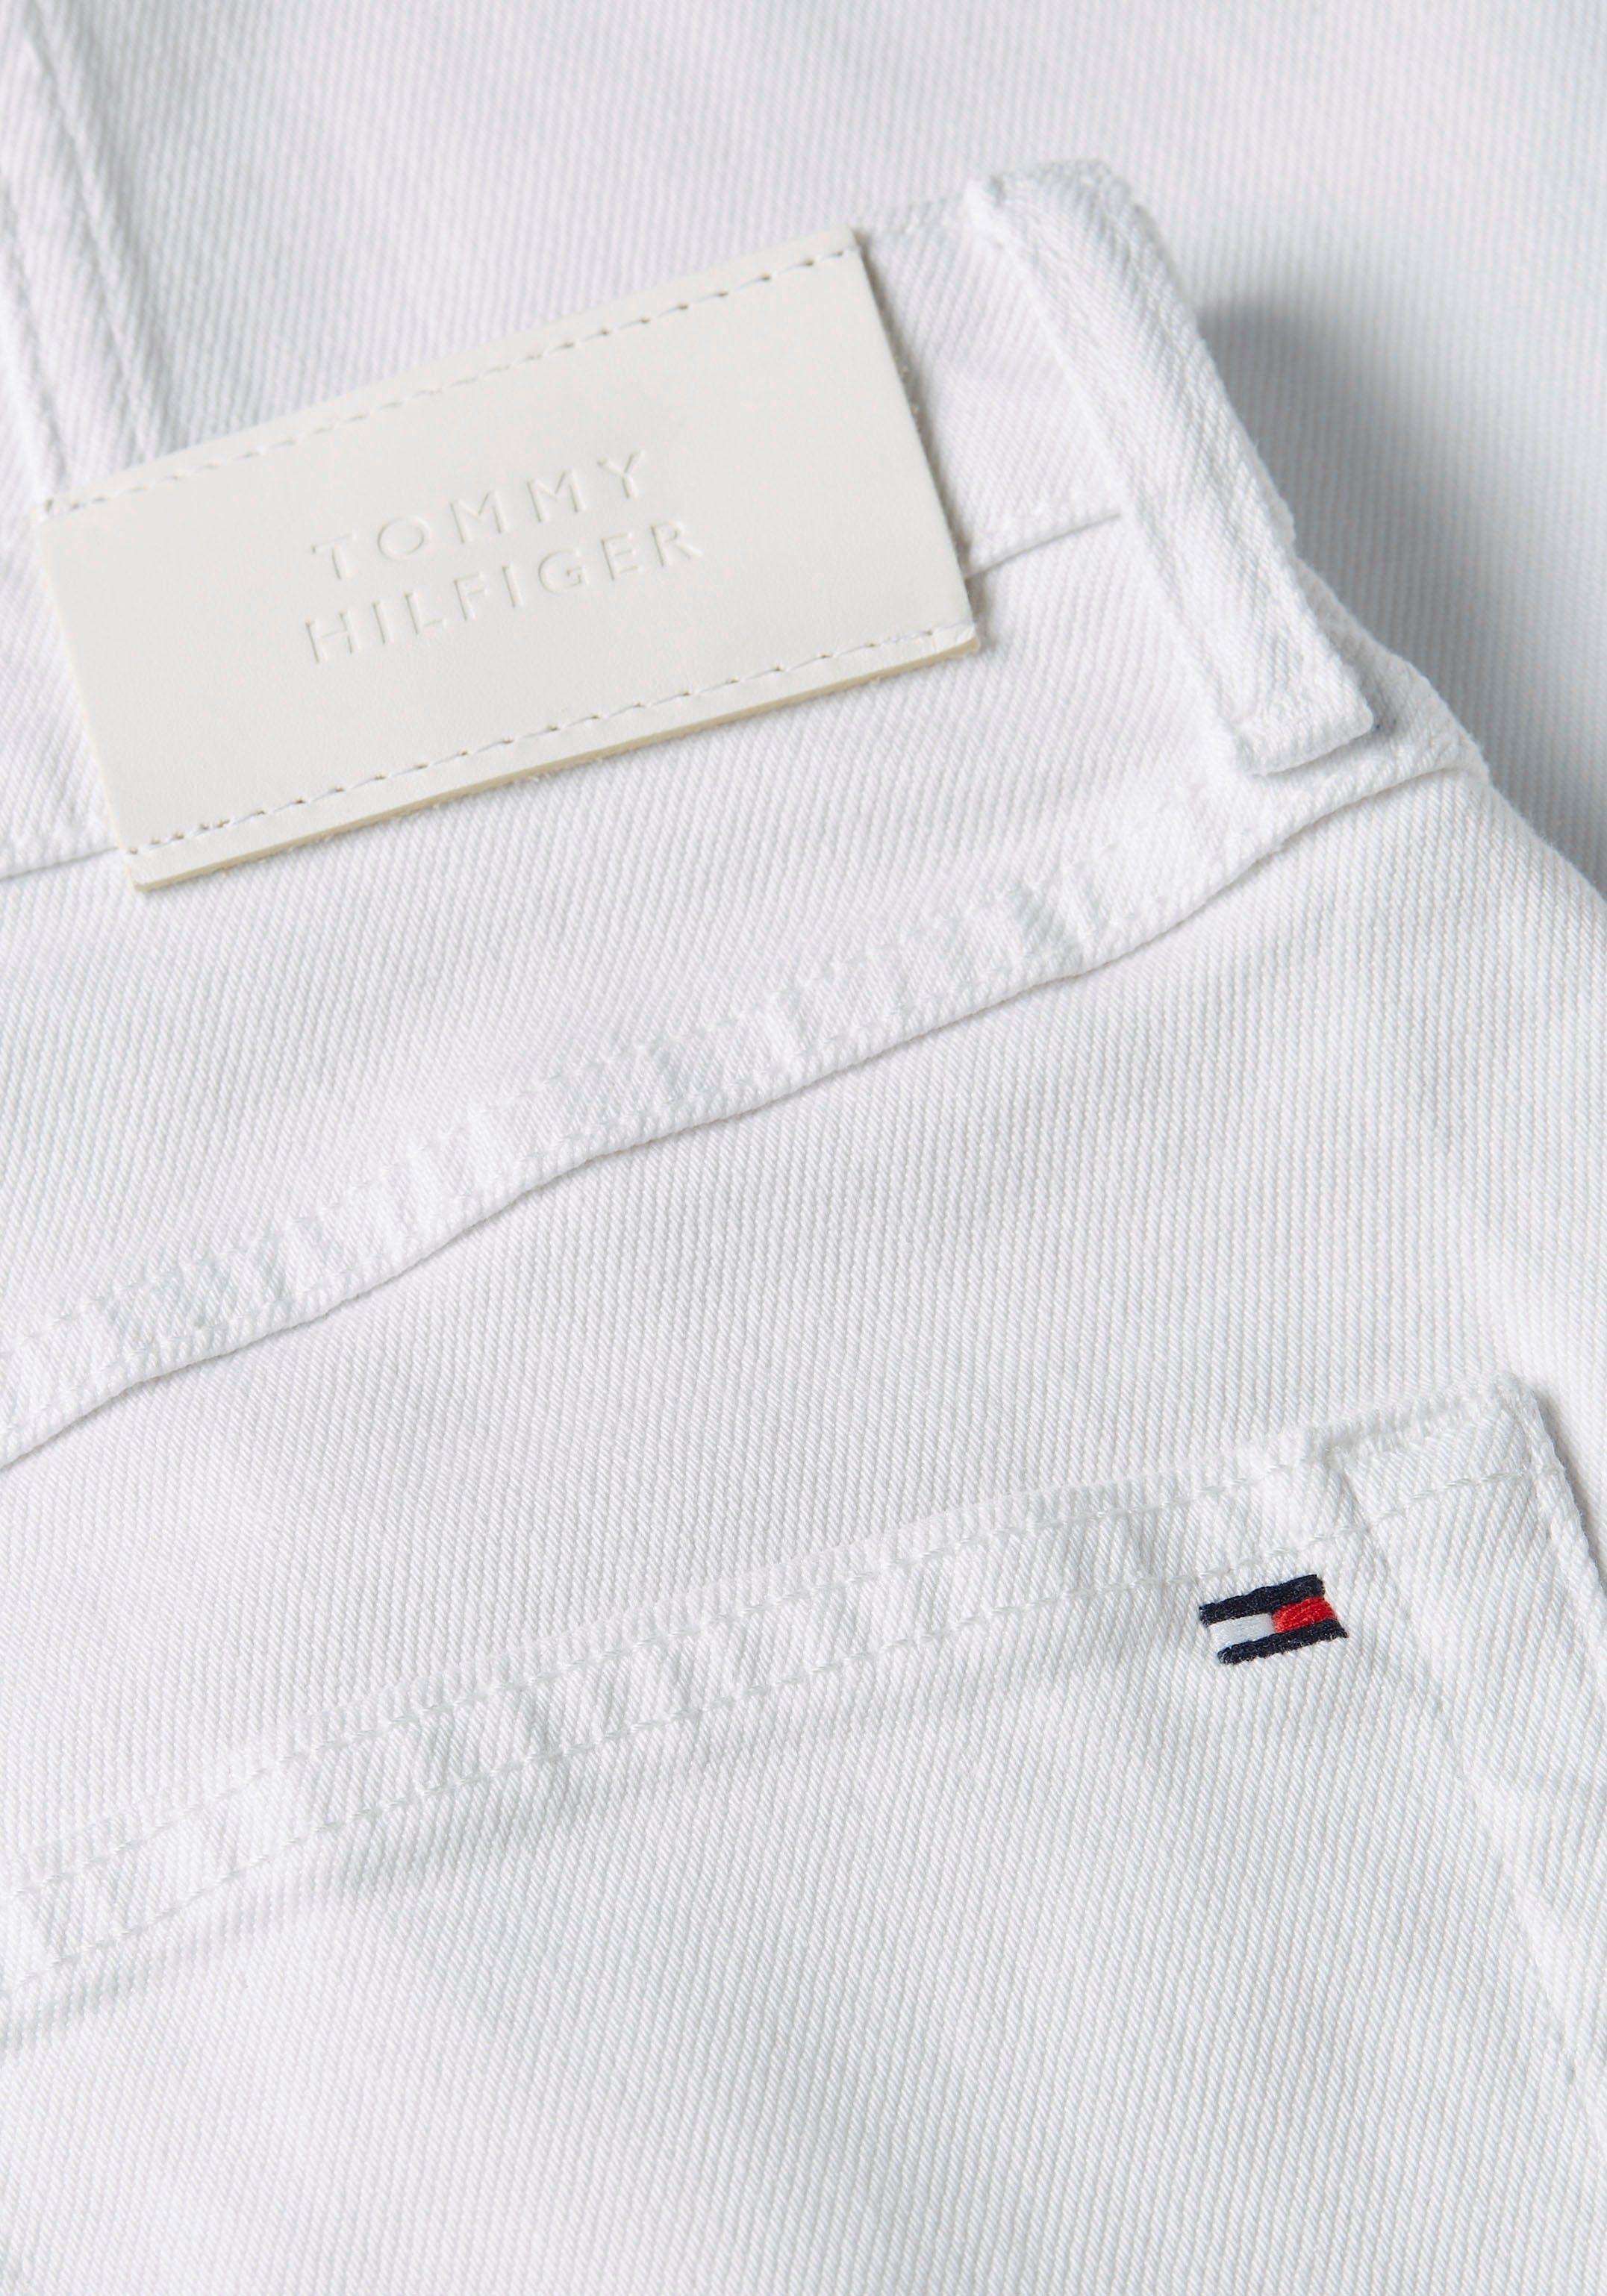 HW Hilfiger weißer Waschung white PAM Relax-fit-Jeans STRAIGHT in RELAXED Optic Tommy